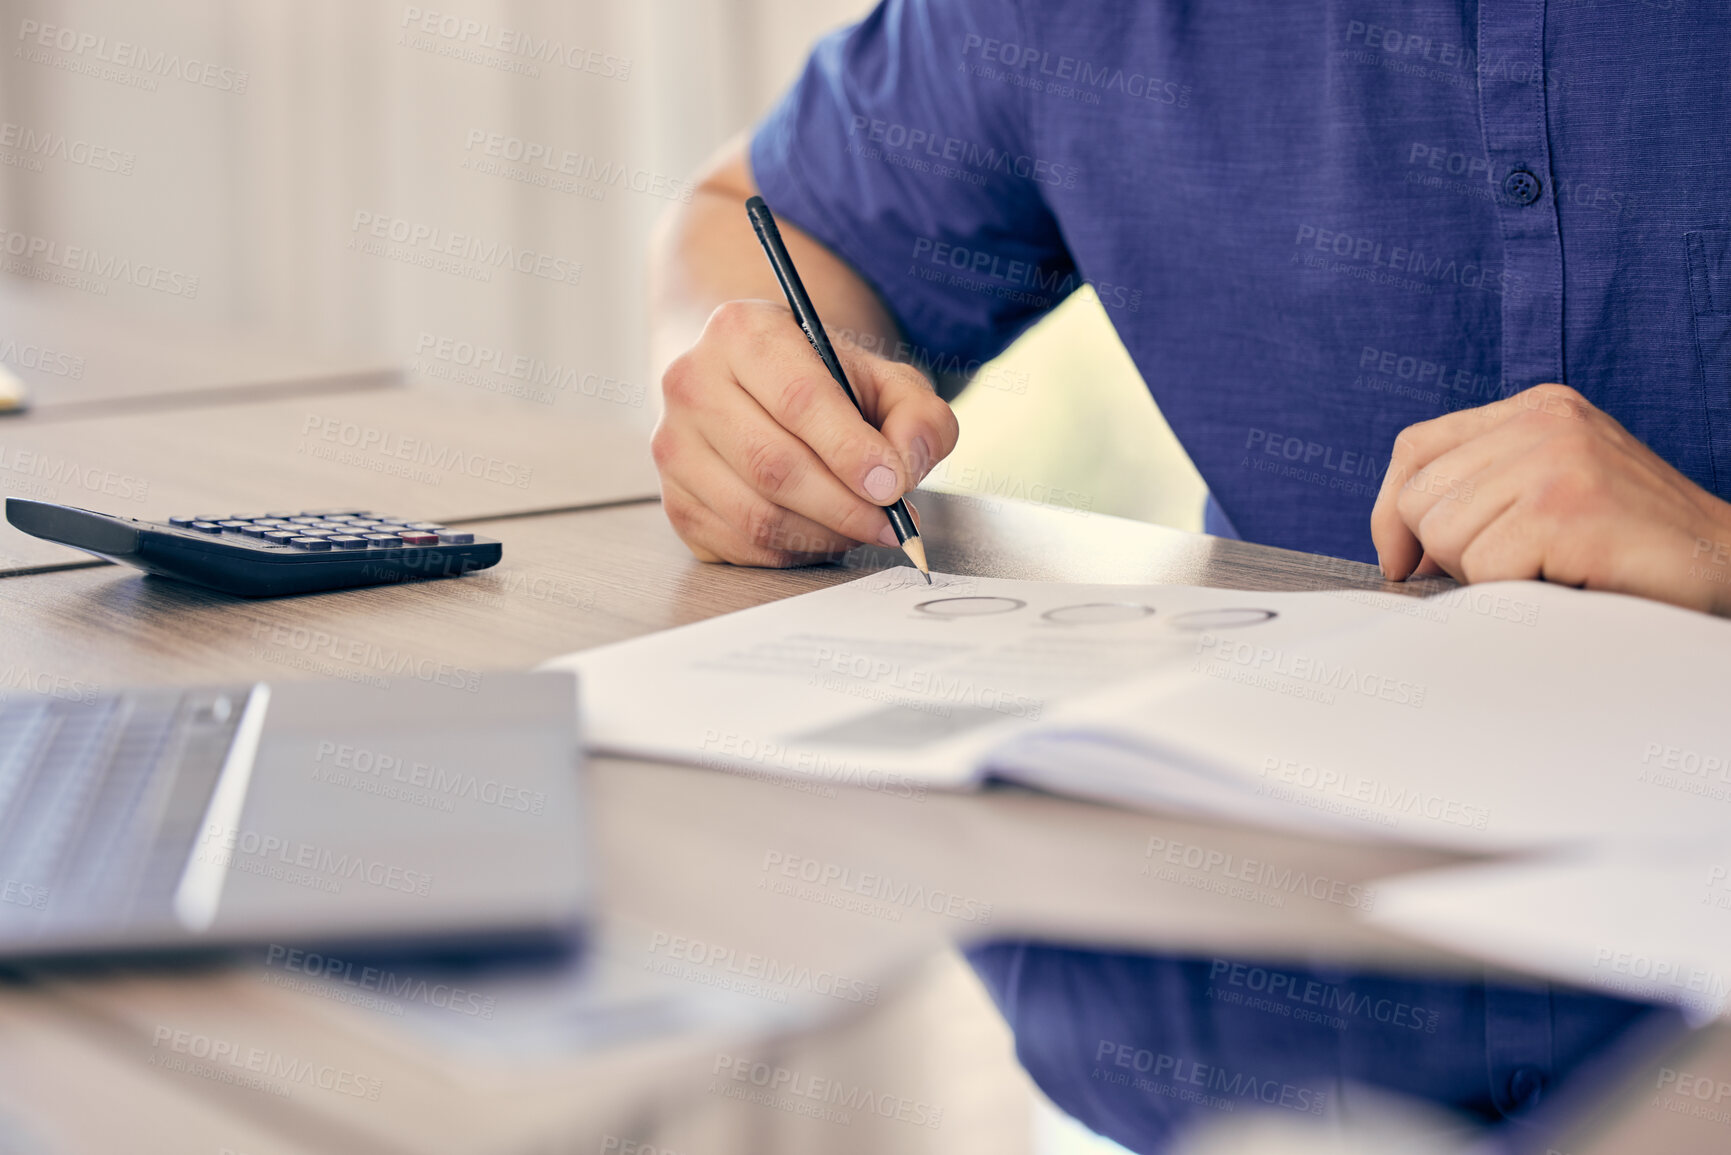 Buy stock photo Cropped shot of an unrecognizable man filling in paperwork at work